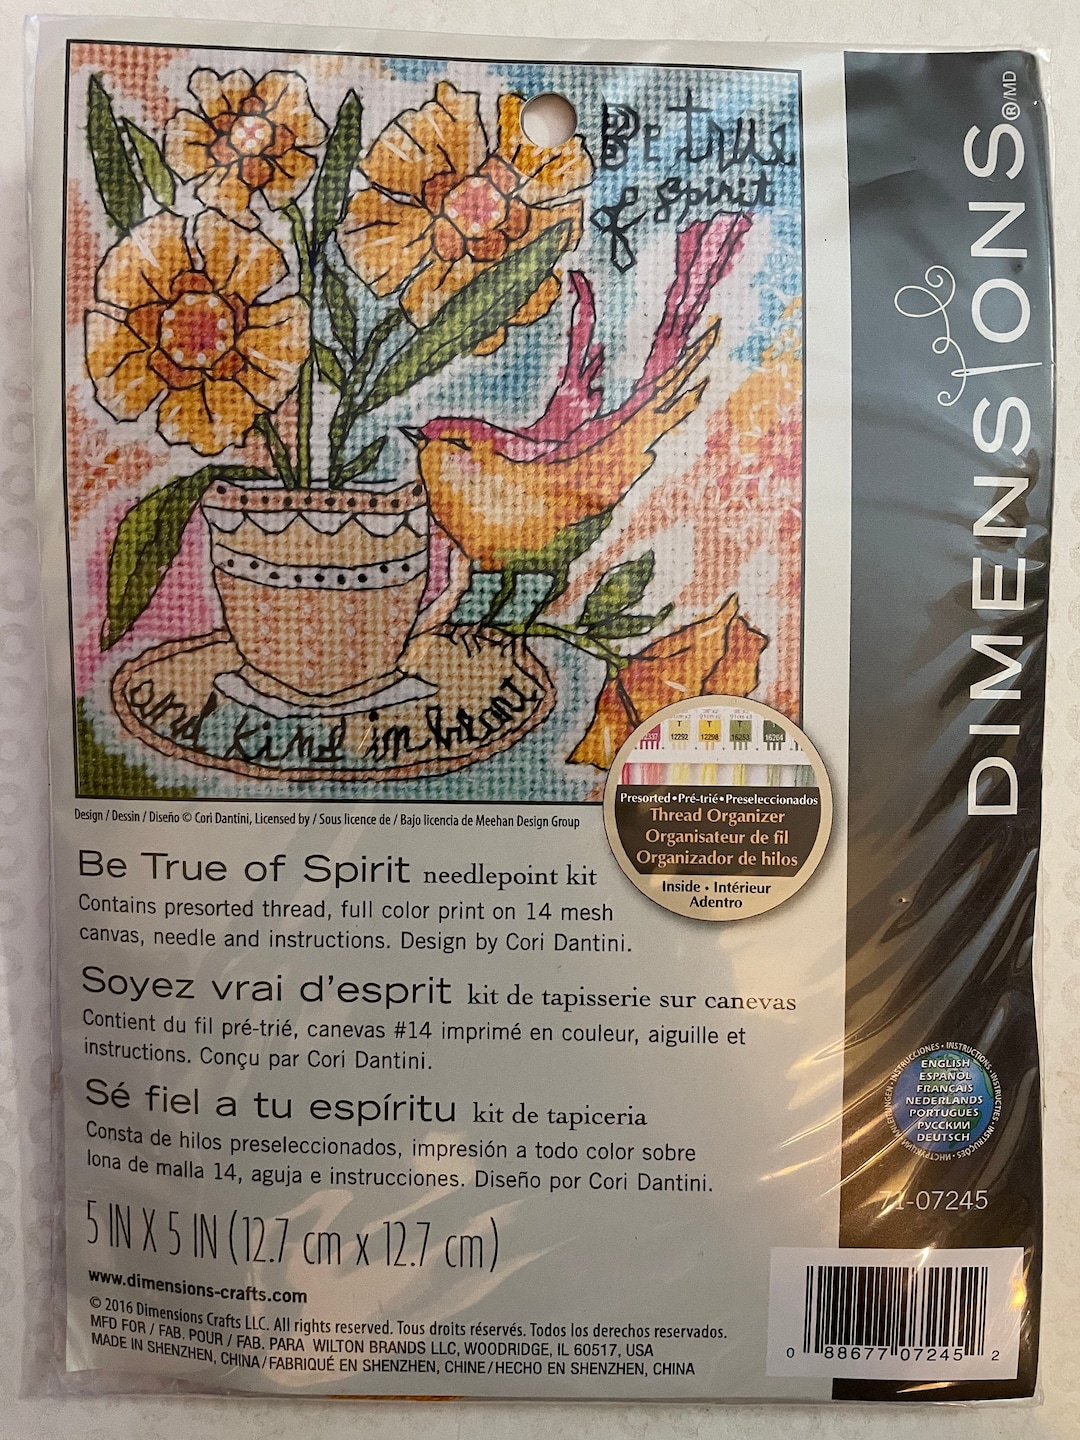 Dimensions Needlepoint Kit No. 71-07245 Be True of Spirit and Kind in Heart  5 X 5 Design by Cori Dantini 